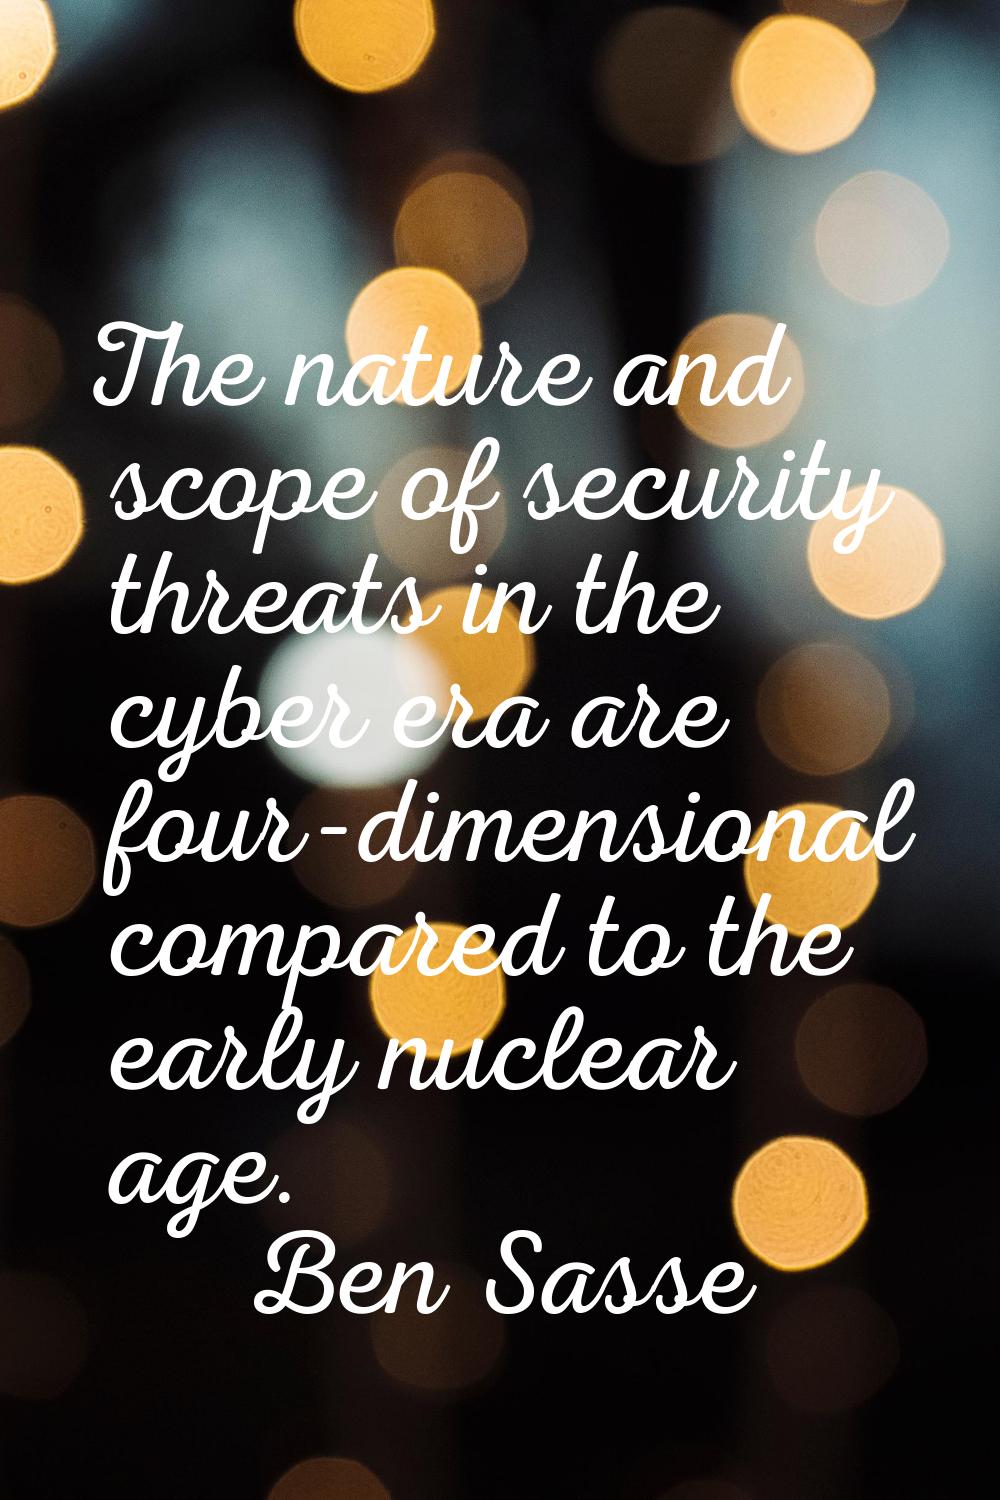 The nature and scope of security threats in the cyber era are four-dimensional compared to the earl